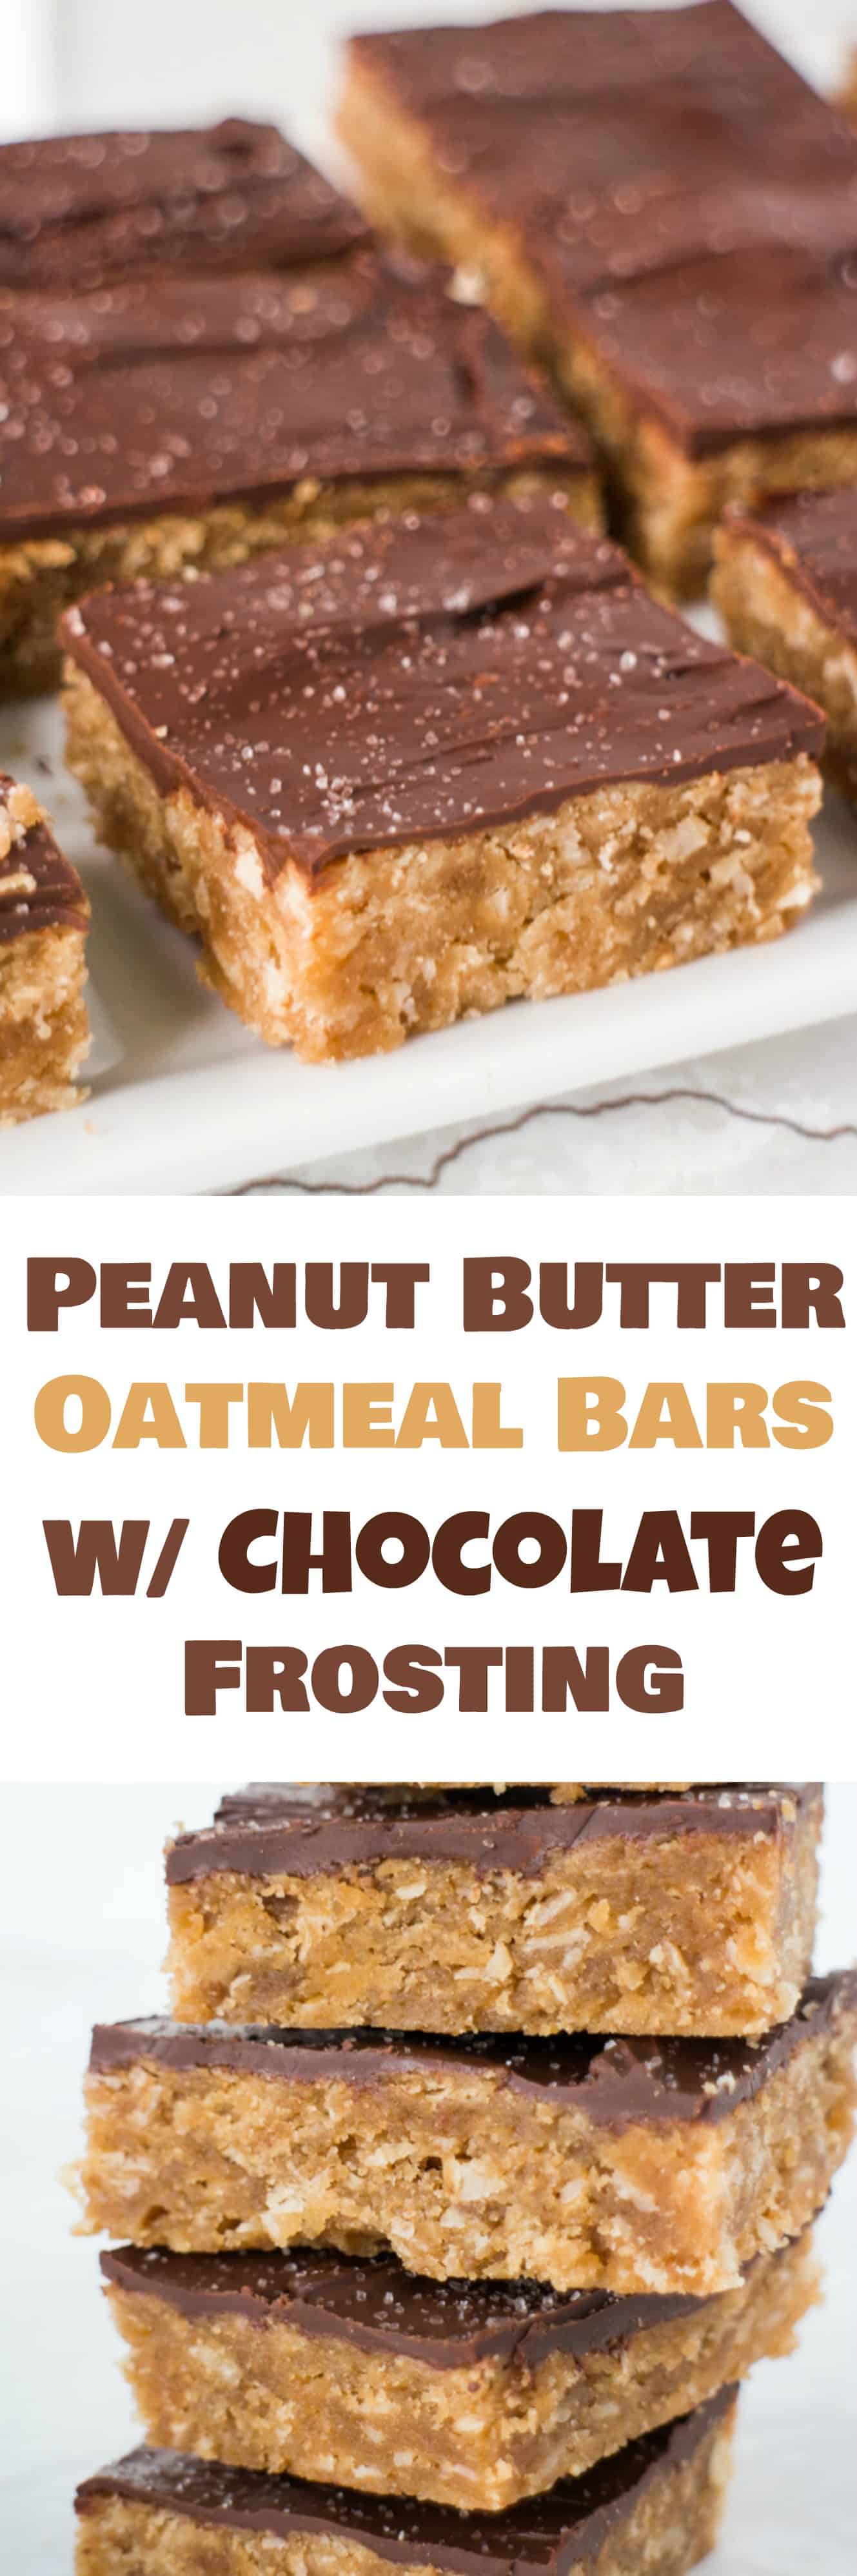 Peanut Butter Oatmeal Bars with Chocolate Frosting - Brooklyn Farm Girl